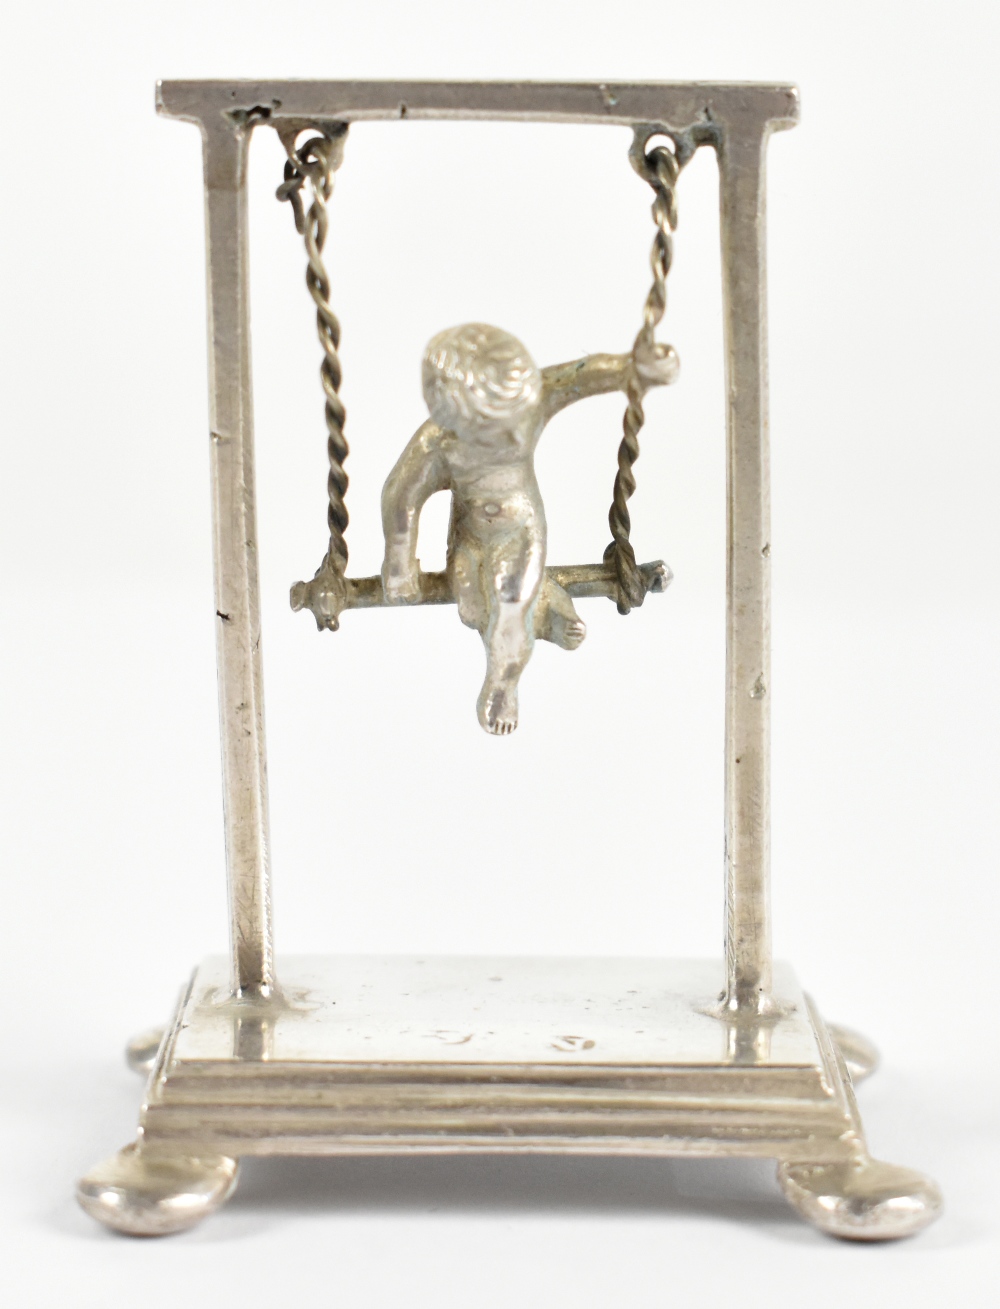 An early 20th century Dutch novelty silver model of a boy in a swing, weight 0.8ozt/25g, height 5.